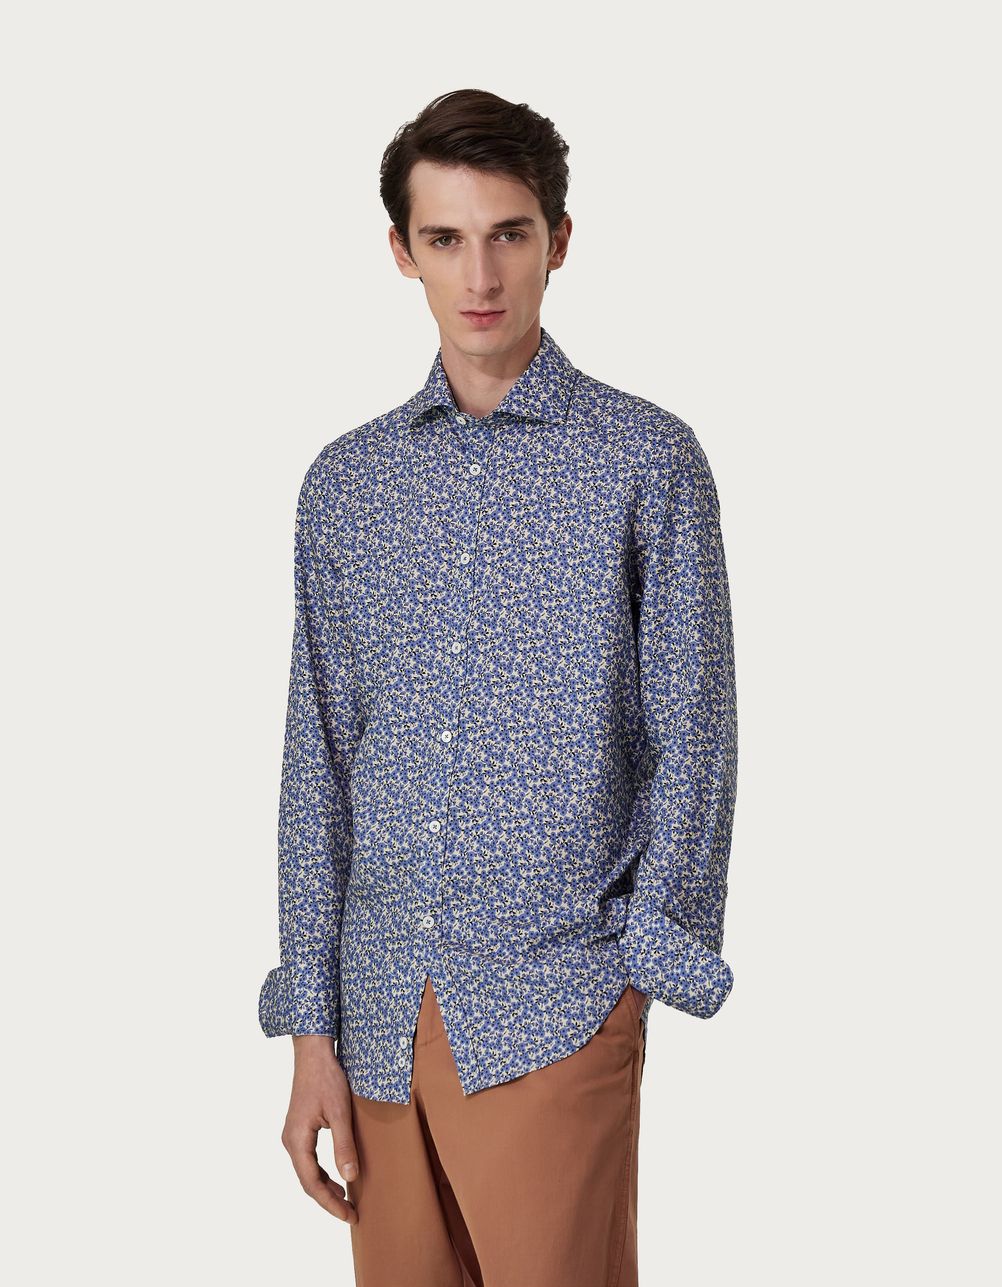 Slim-fit shirt in light blue and beige lyocell